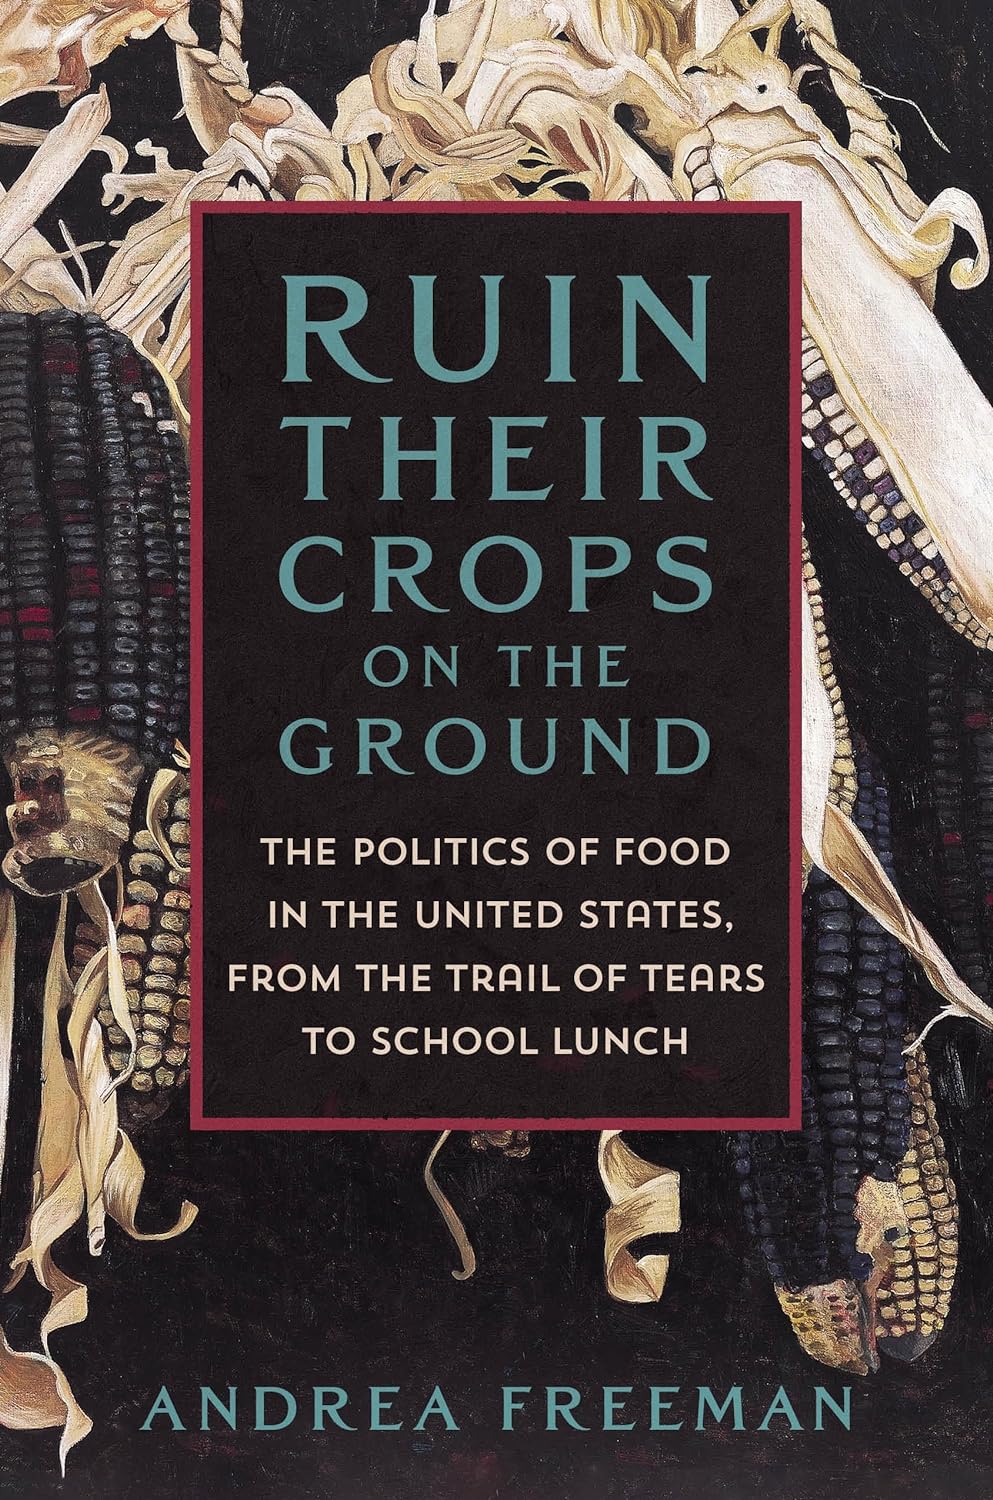 Ruin Their Crops on the Ground The Politics of Food in the United States, from the Trail of Tears to School Lunch (Andrea Freeman)